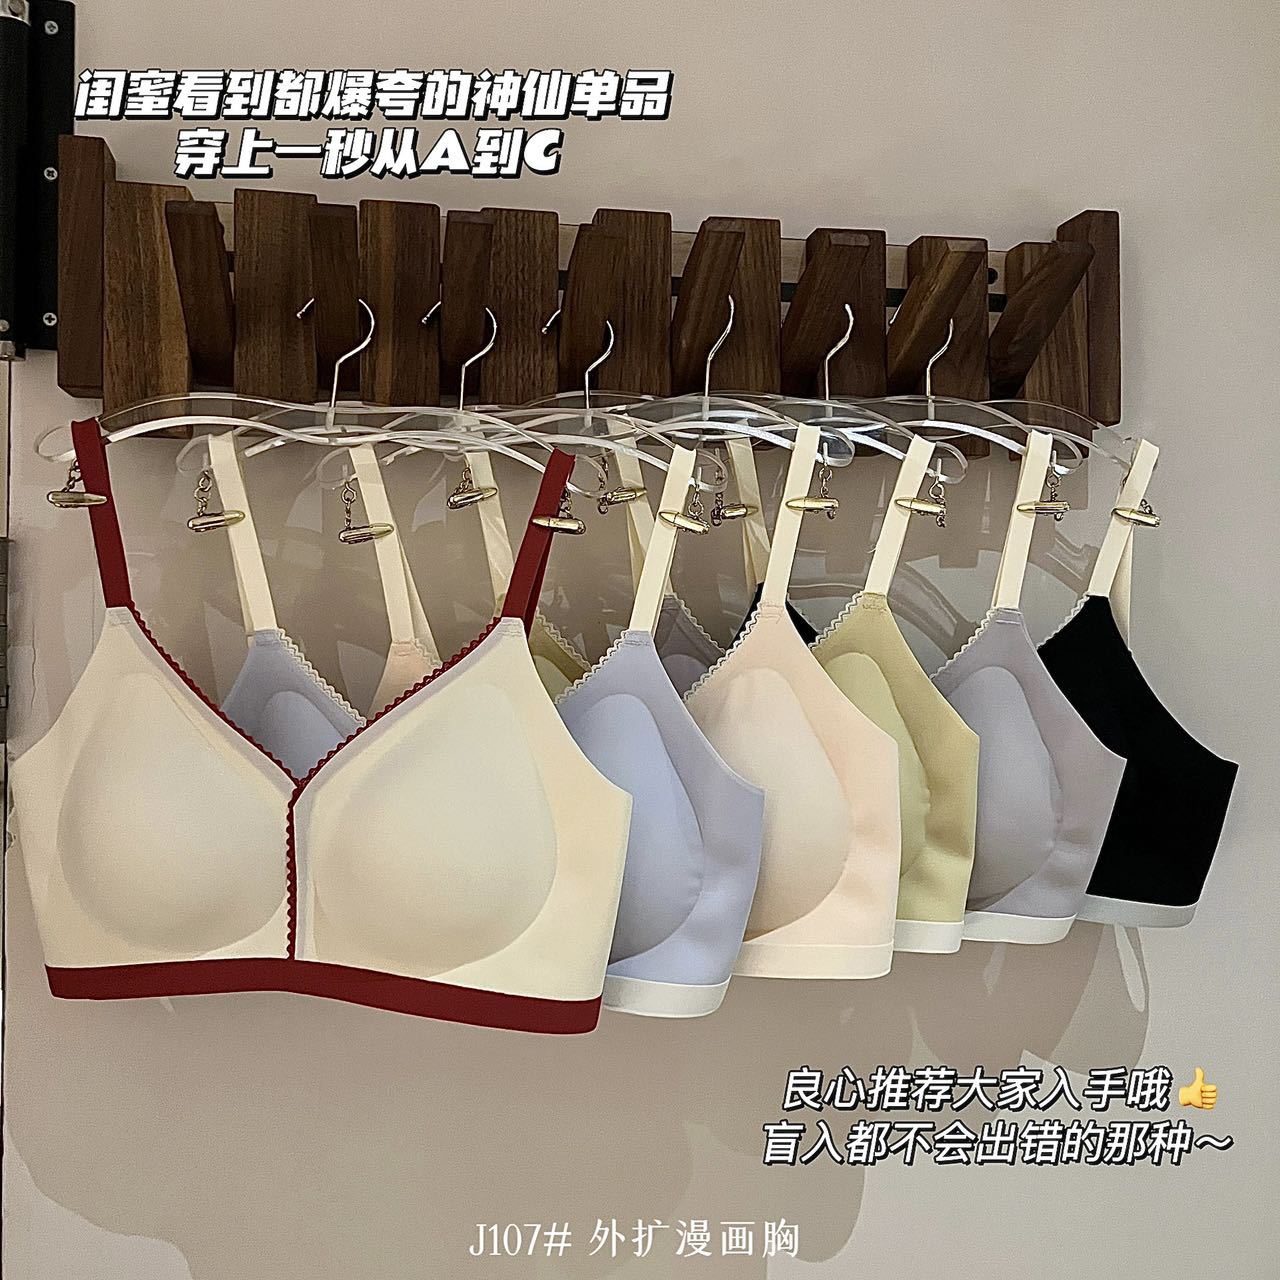 New Expansion Underwear Women's Cartoon Figure Push up and Show Big Seamless No Wire Accessory Breast Push up Contrast Color V-neck Bra